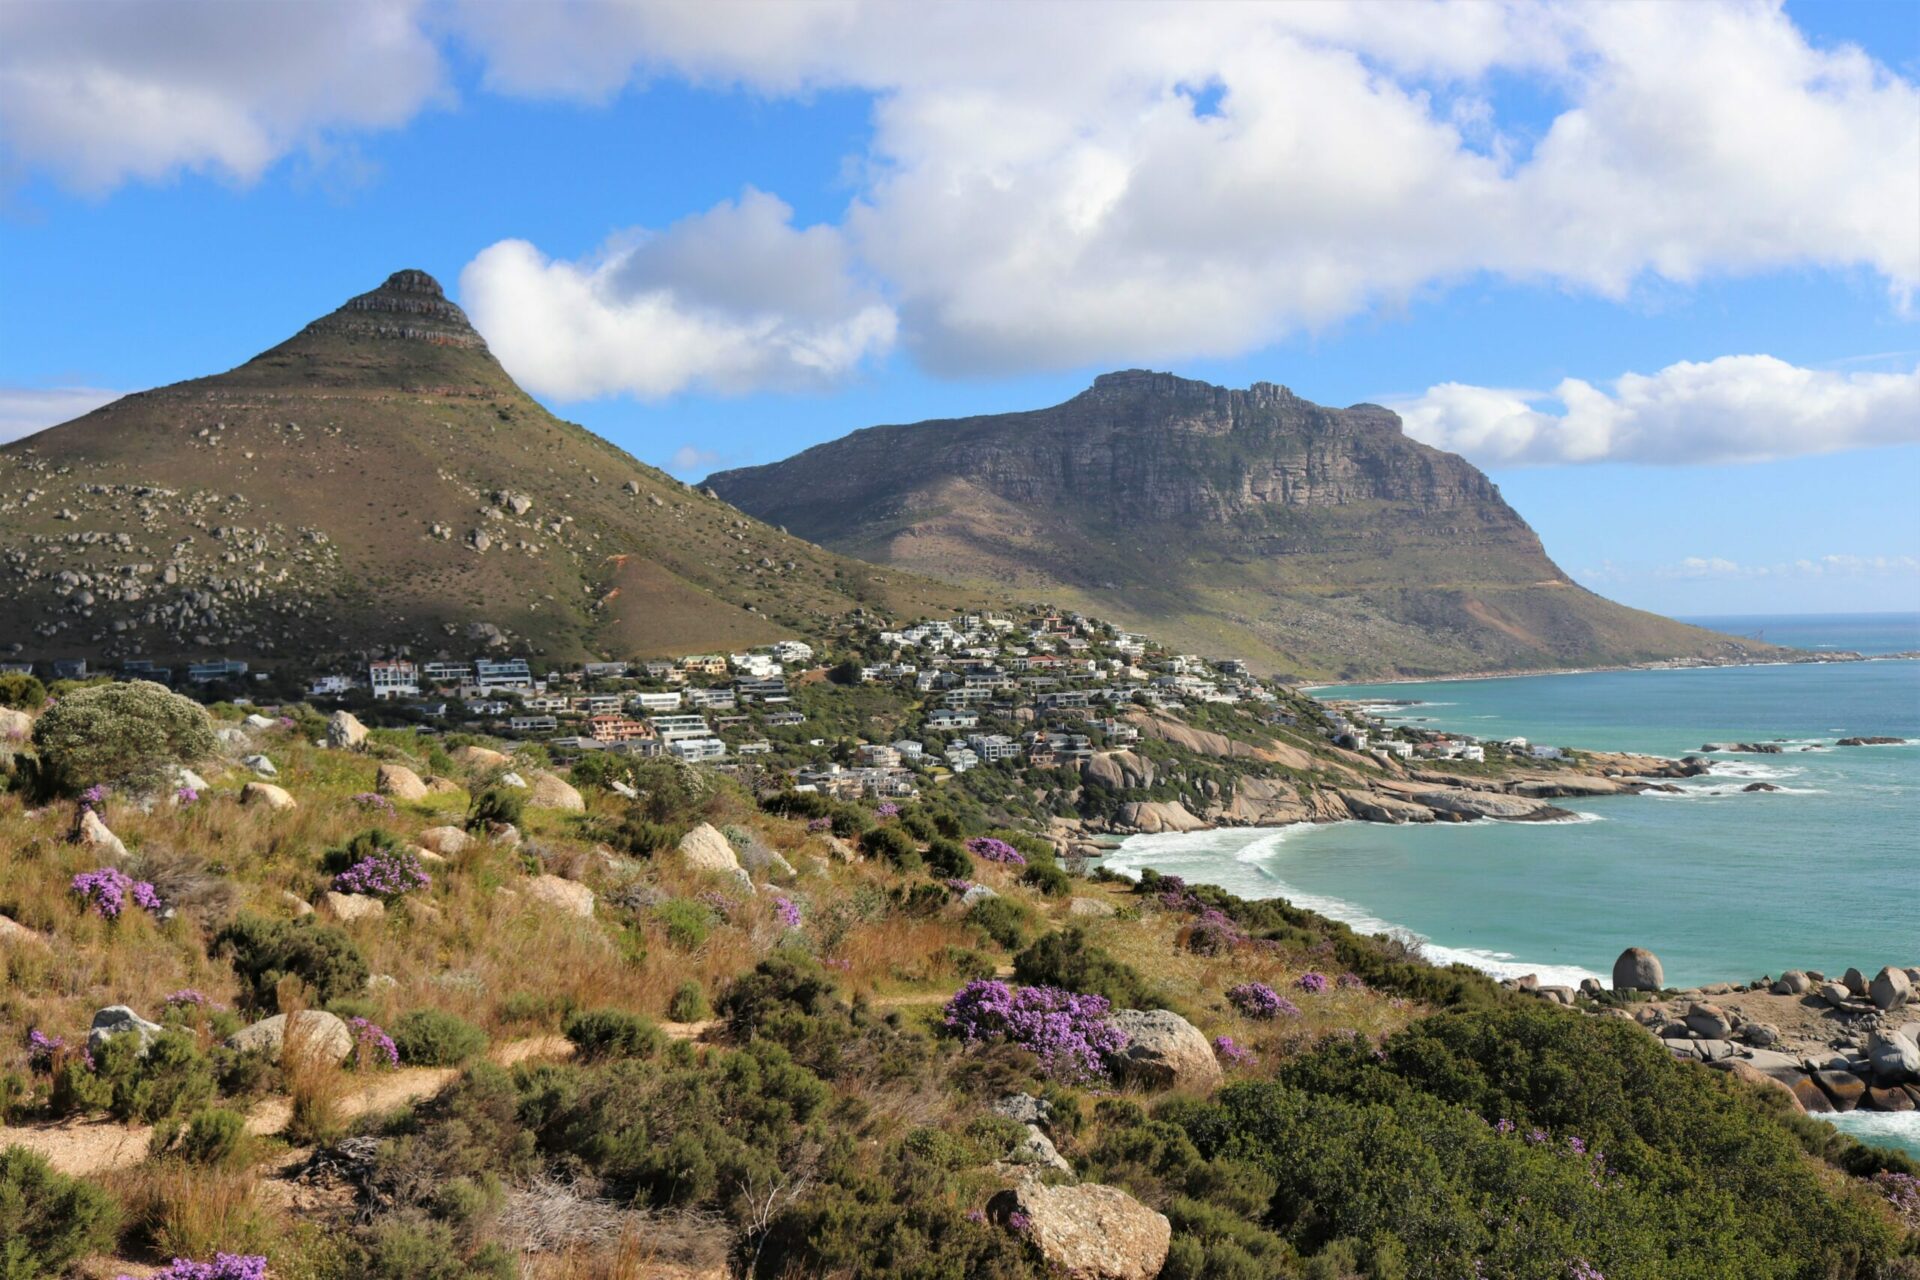 beautiful sunny day in cape town taken from a scenic hike overlooking the mountains and water